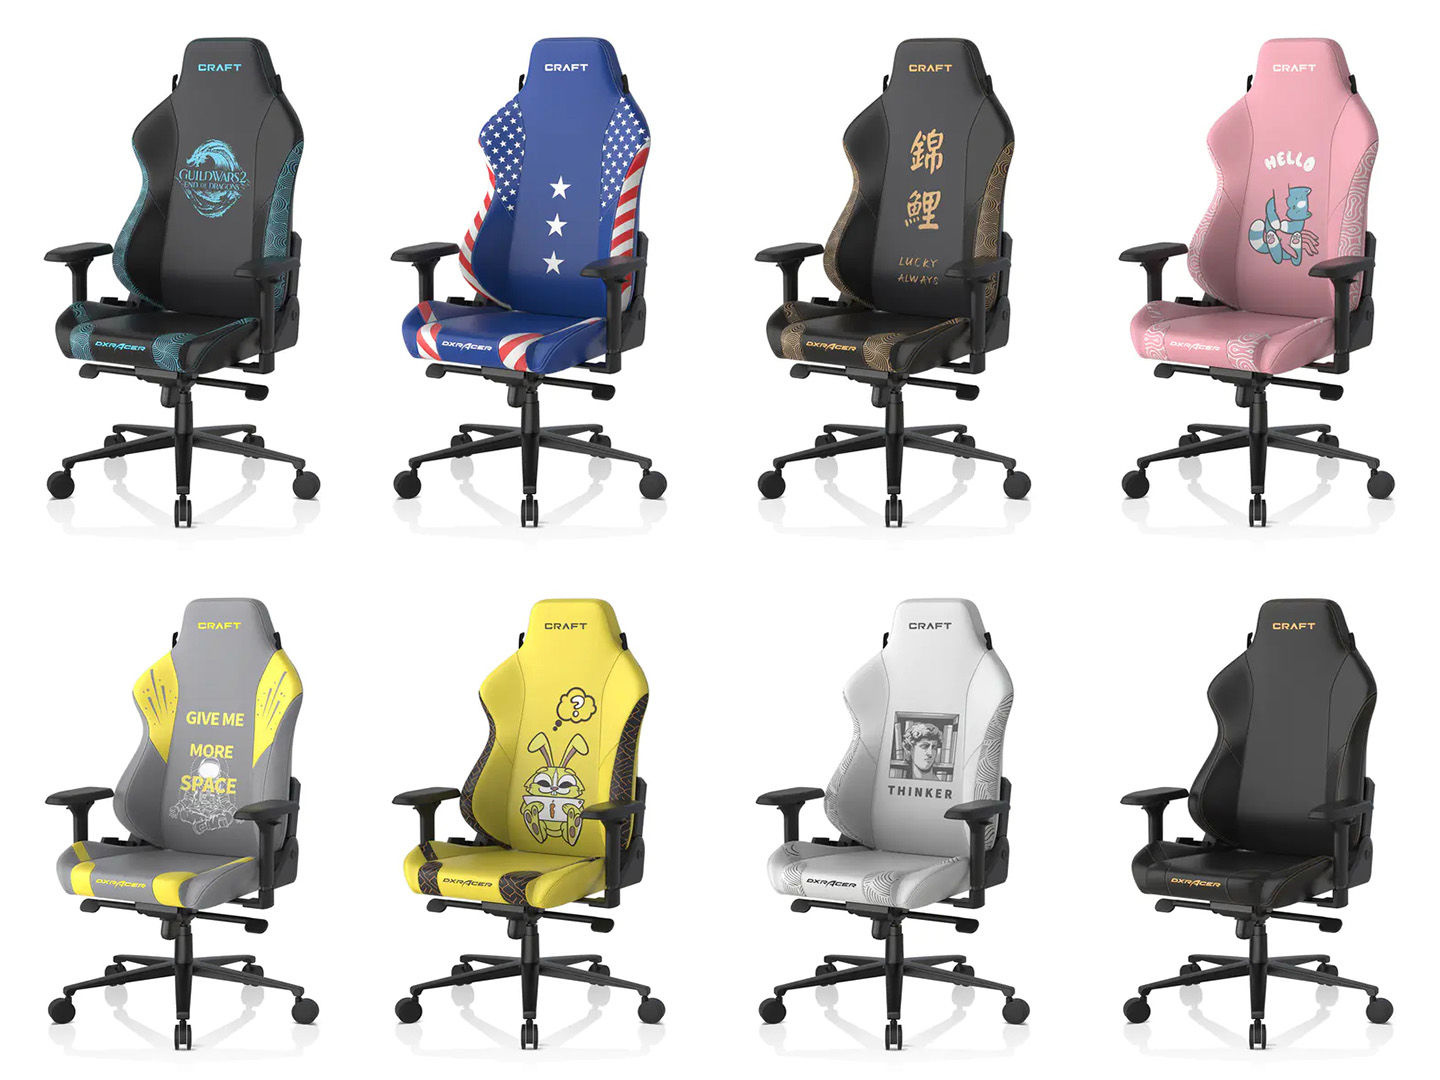 DXRacer Craft Classic Gaming Chair Review - DXRacer Craft Racing Chair:  Introduction and Assembly